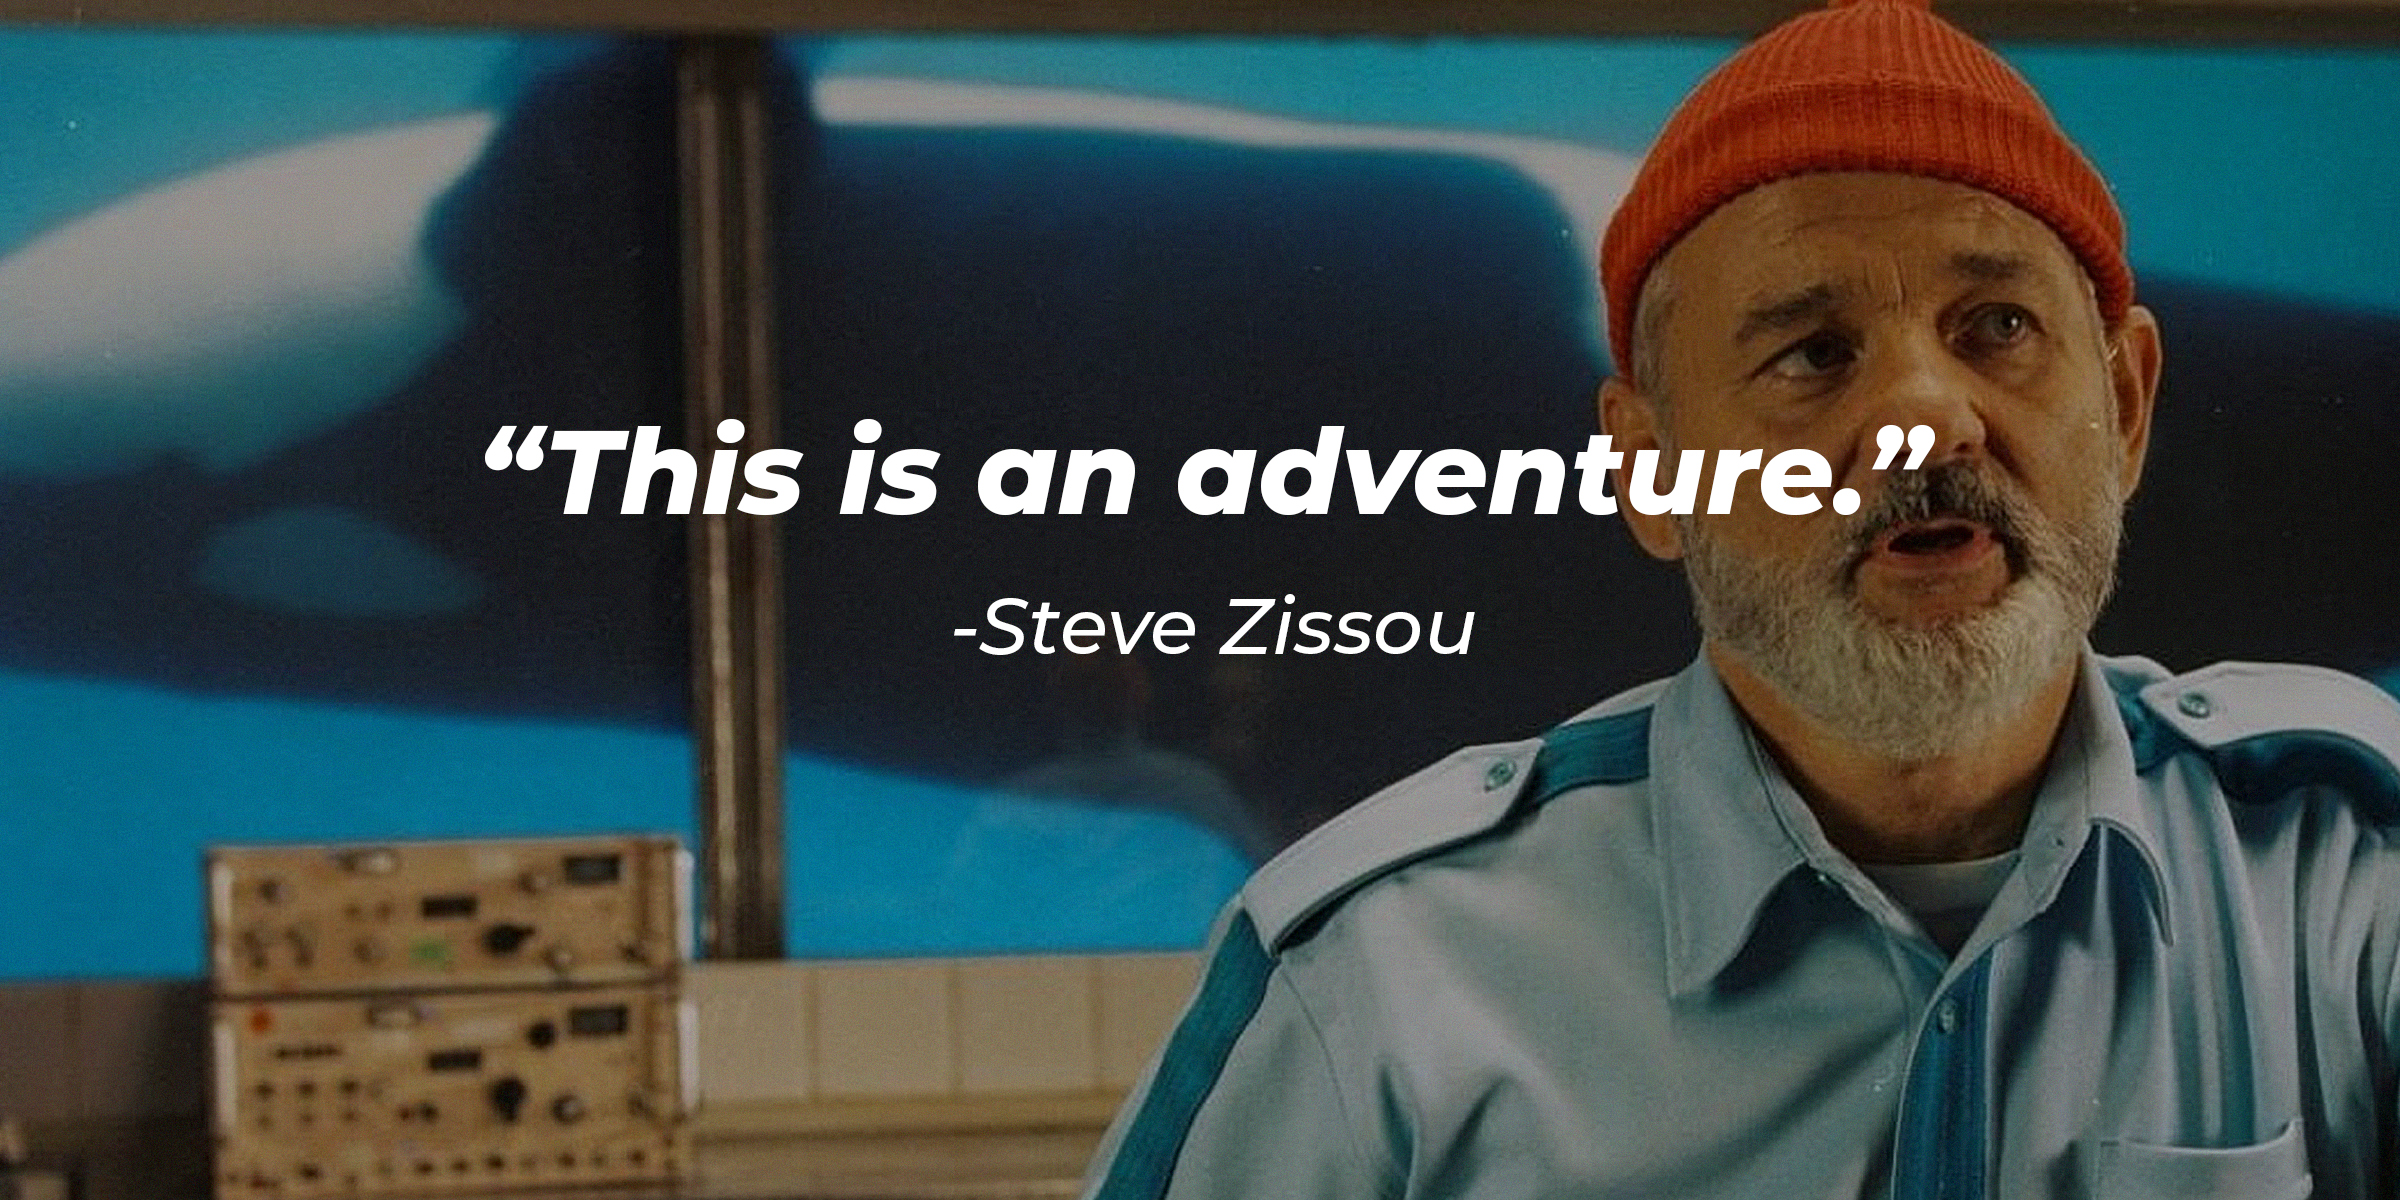 Steve Zissou with the quote, "This is an adventure" | Source: facebook.com/The Life Aquatic with Steve Zissou